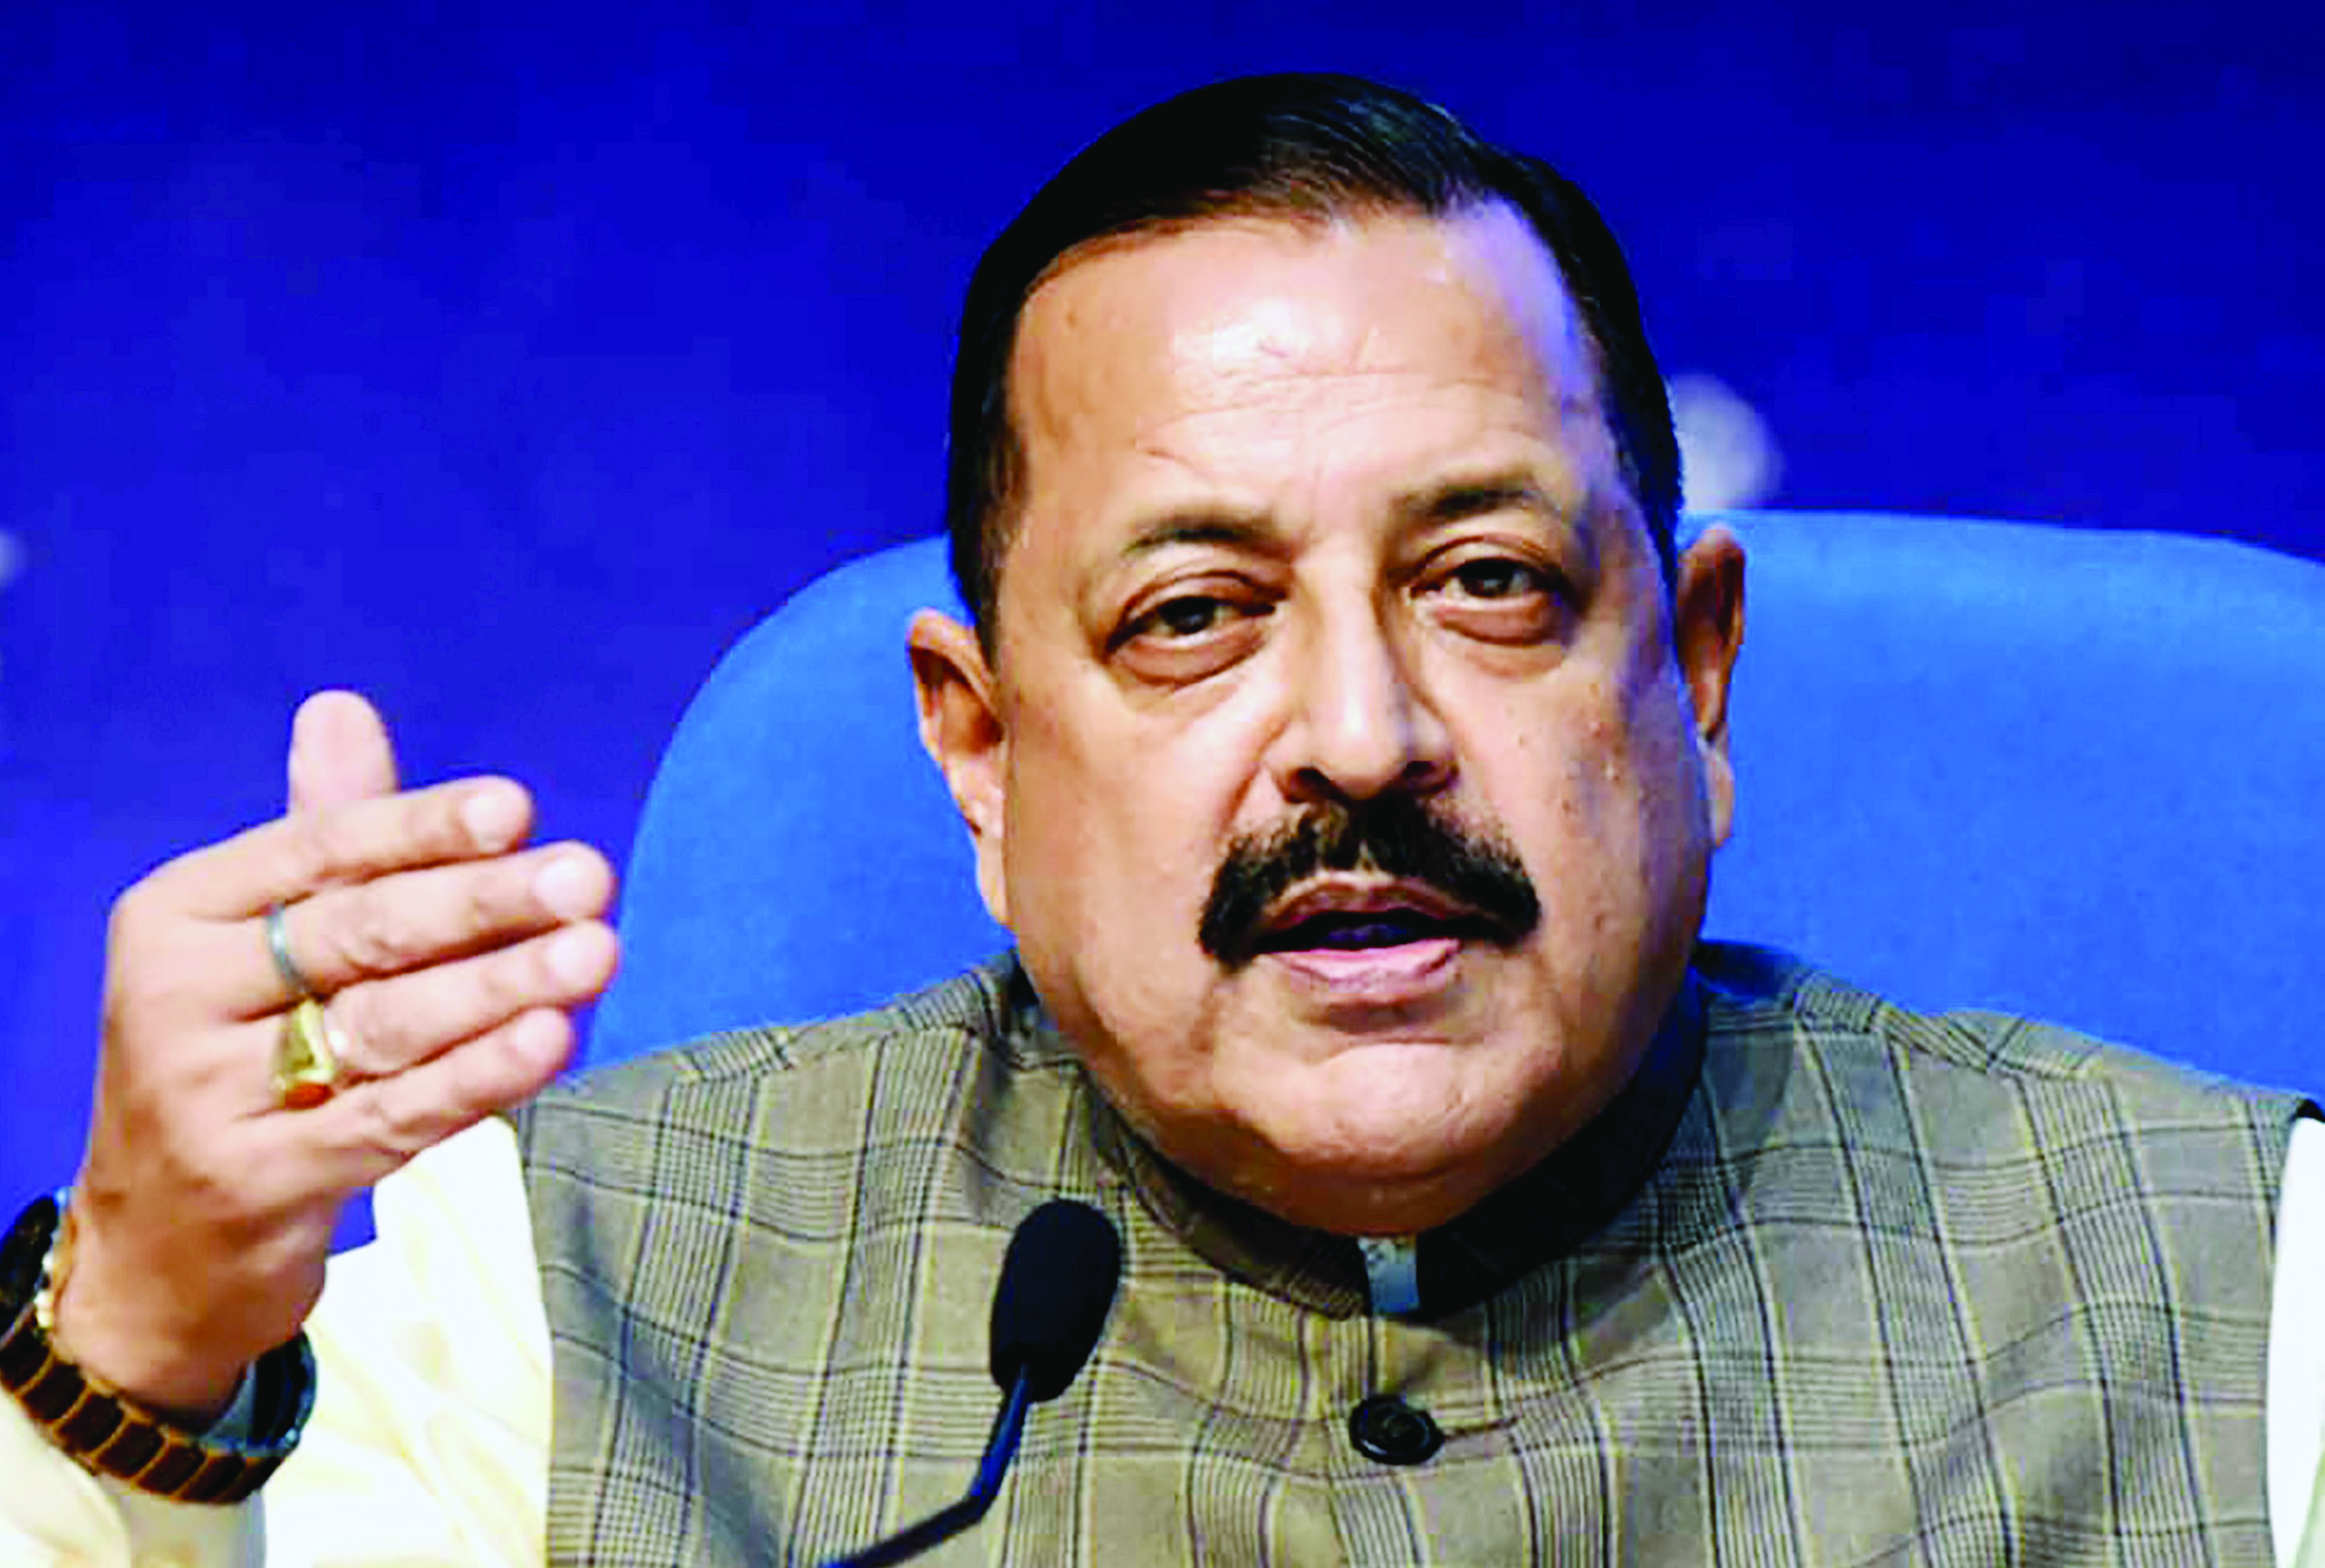 Startups in India grew over 300 times in 10 years: Jitendra Singh